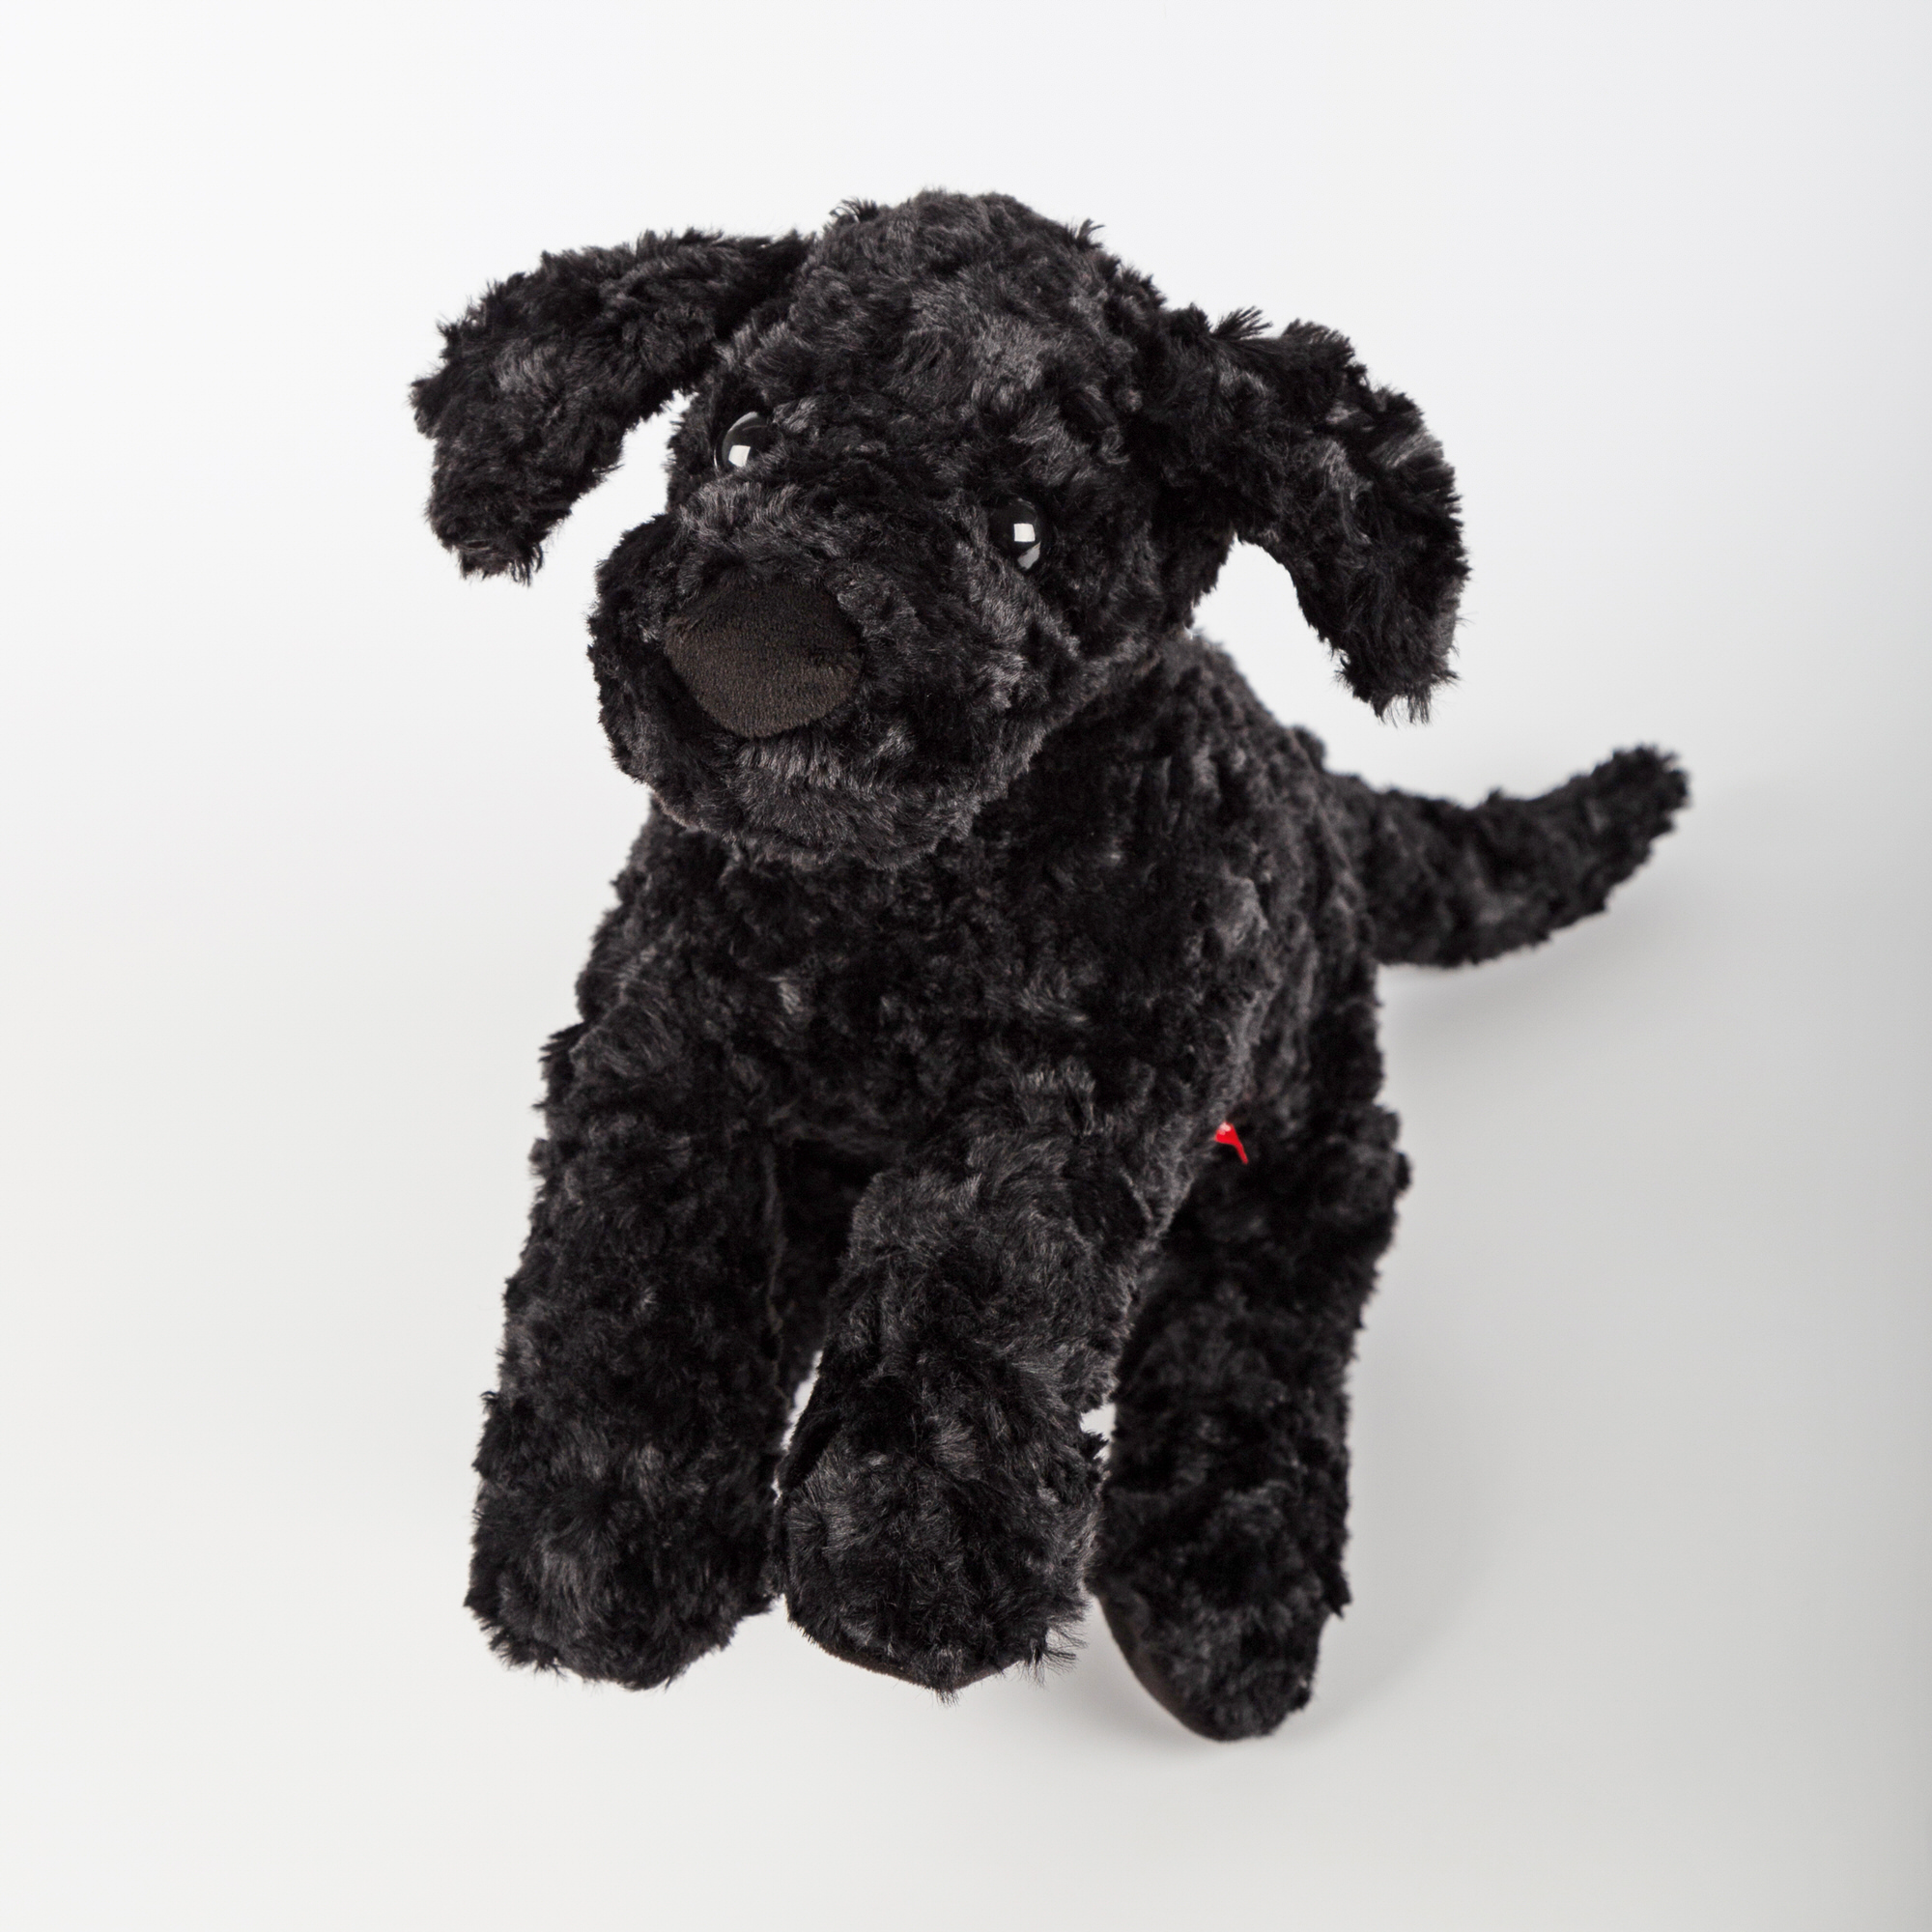 Plush toy dog Richard Wagner's puppy, Beasts collection